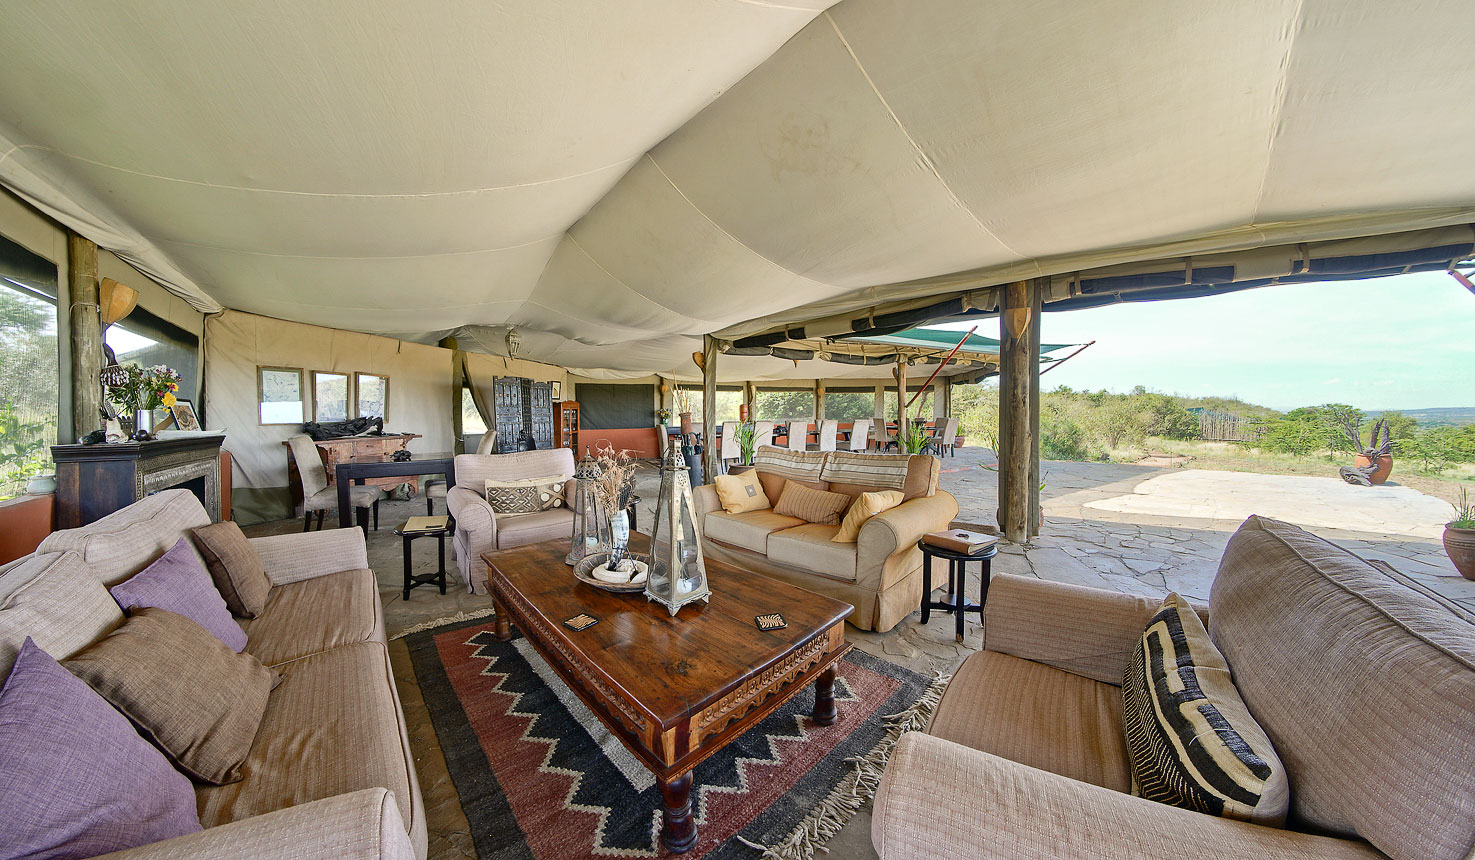 Safari to Kicheche Valley Camp with Africa Travel Resource